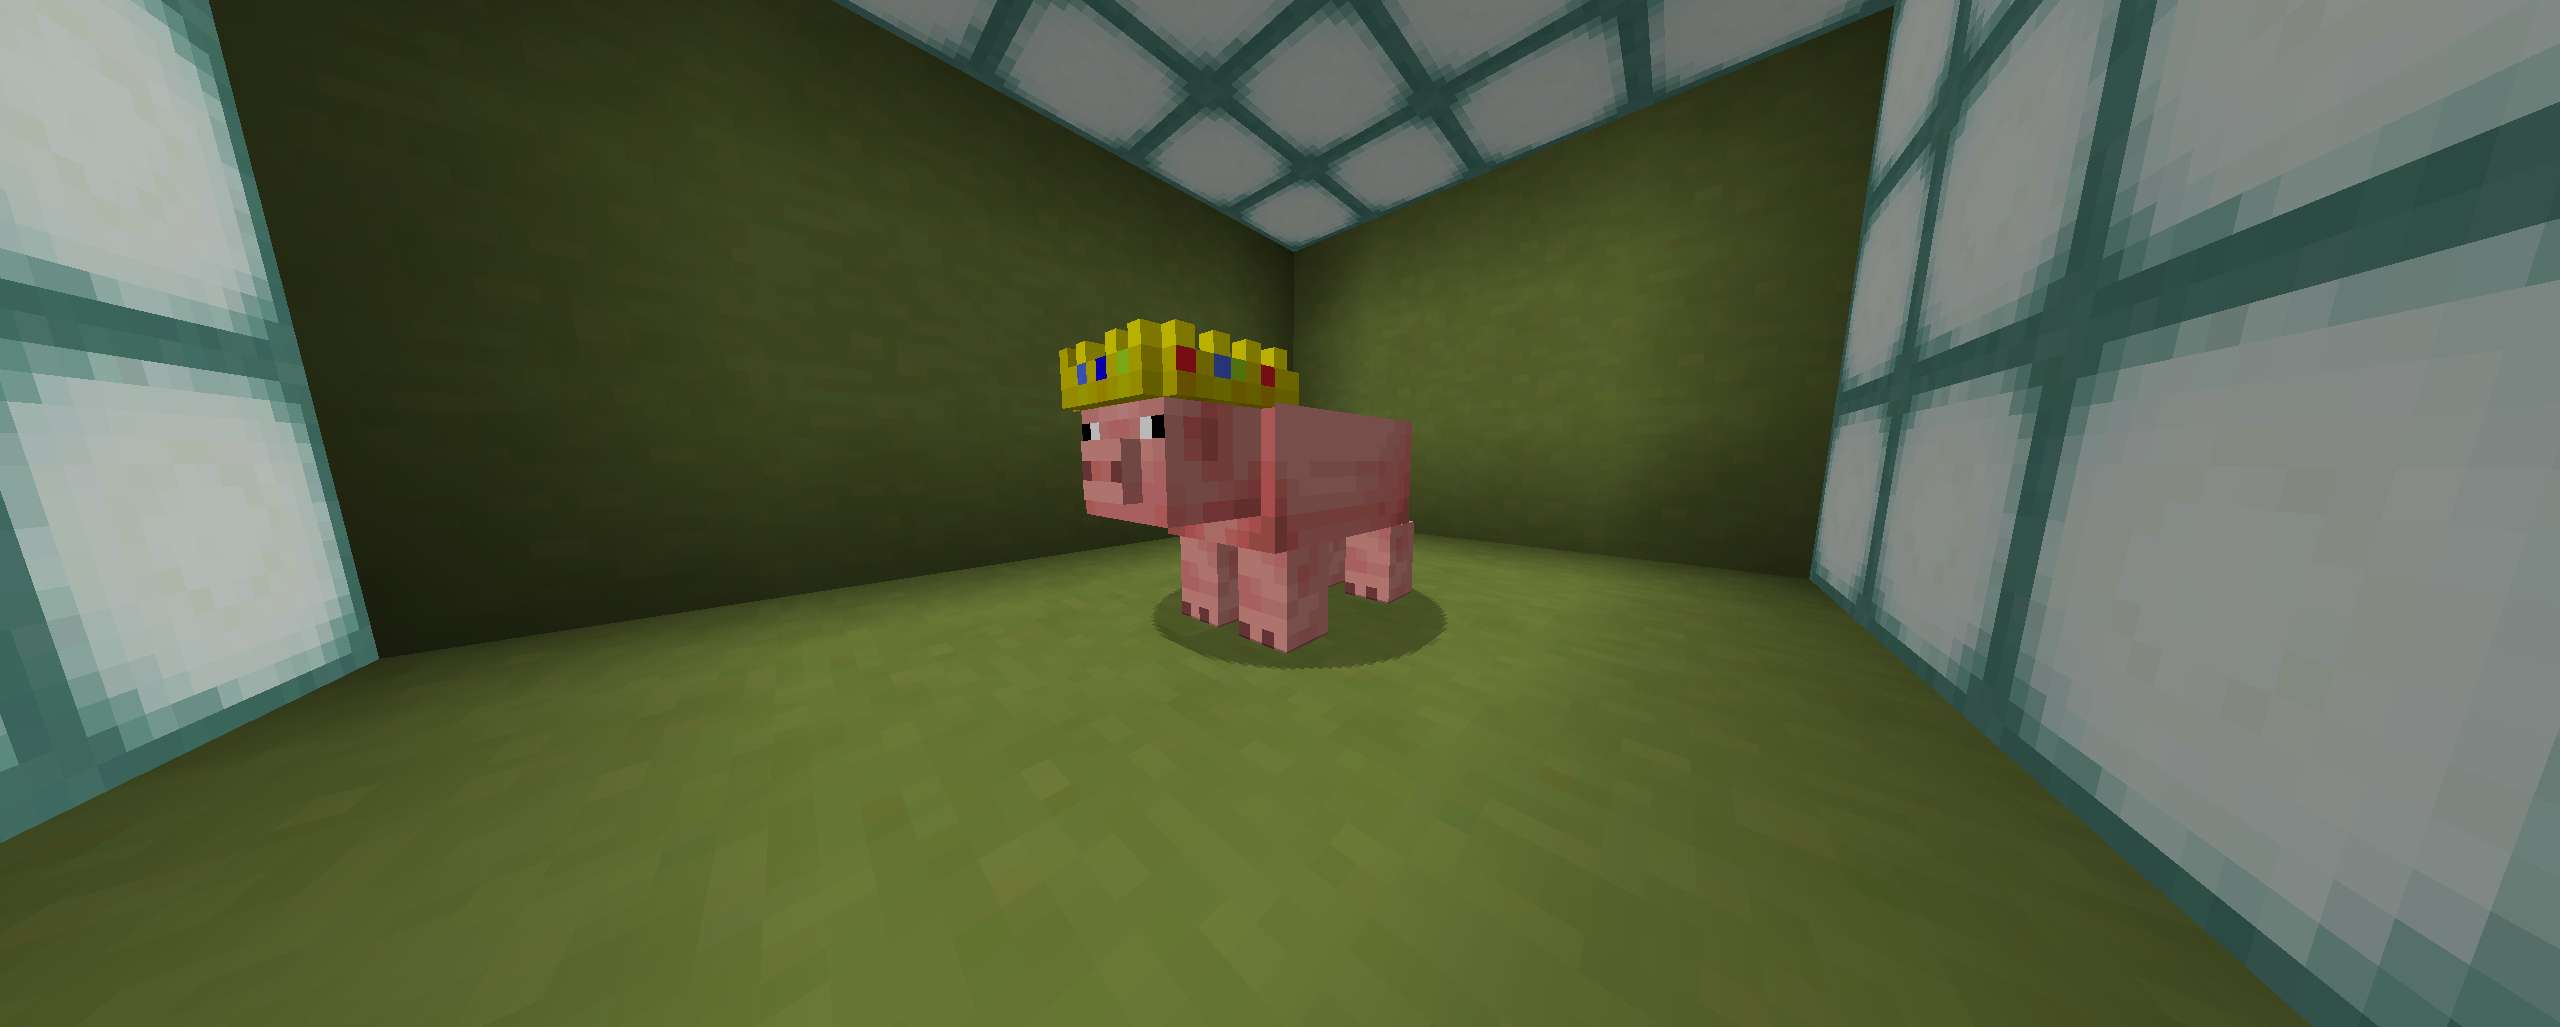 Mojang added Technoblade's crown to the pig on the Minecraft